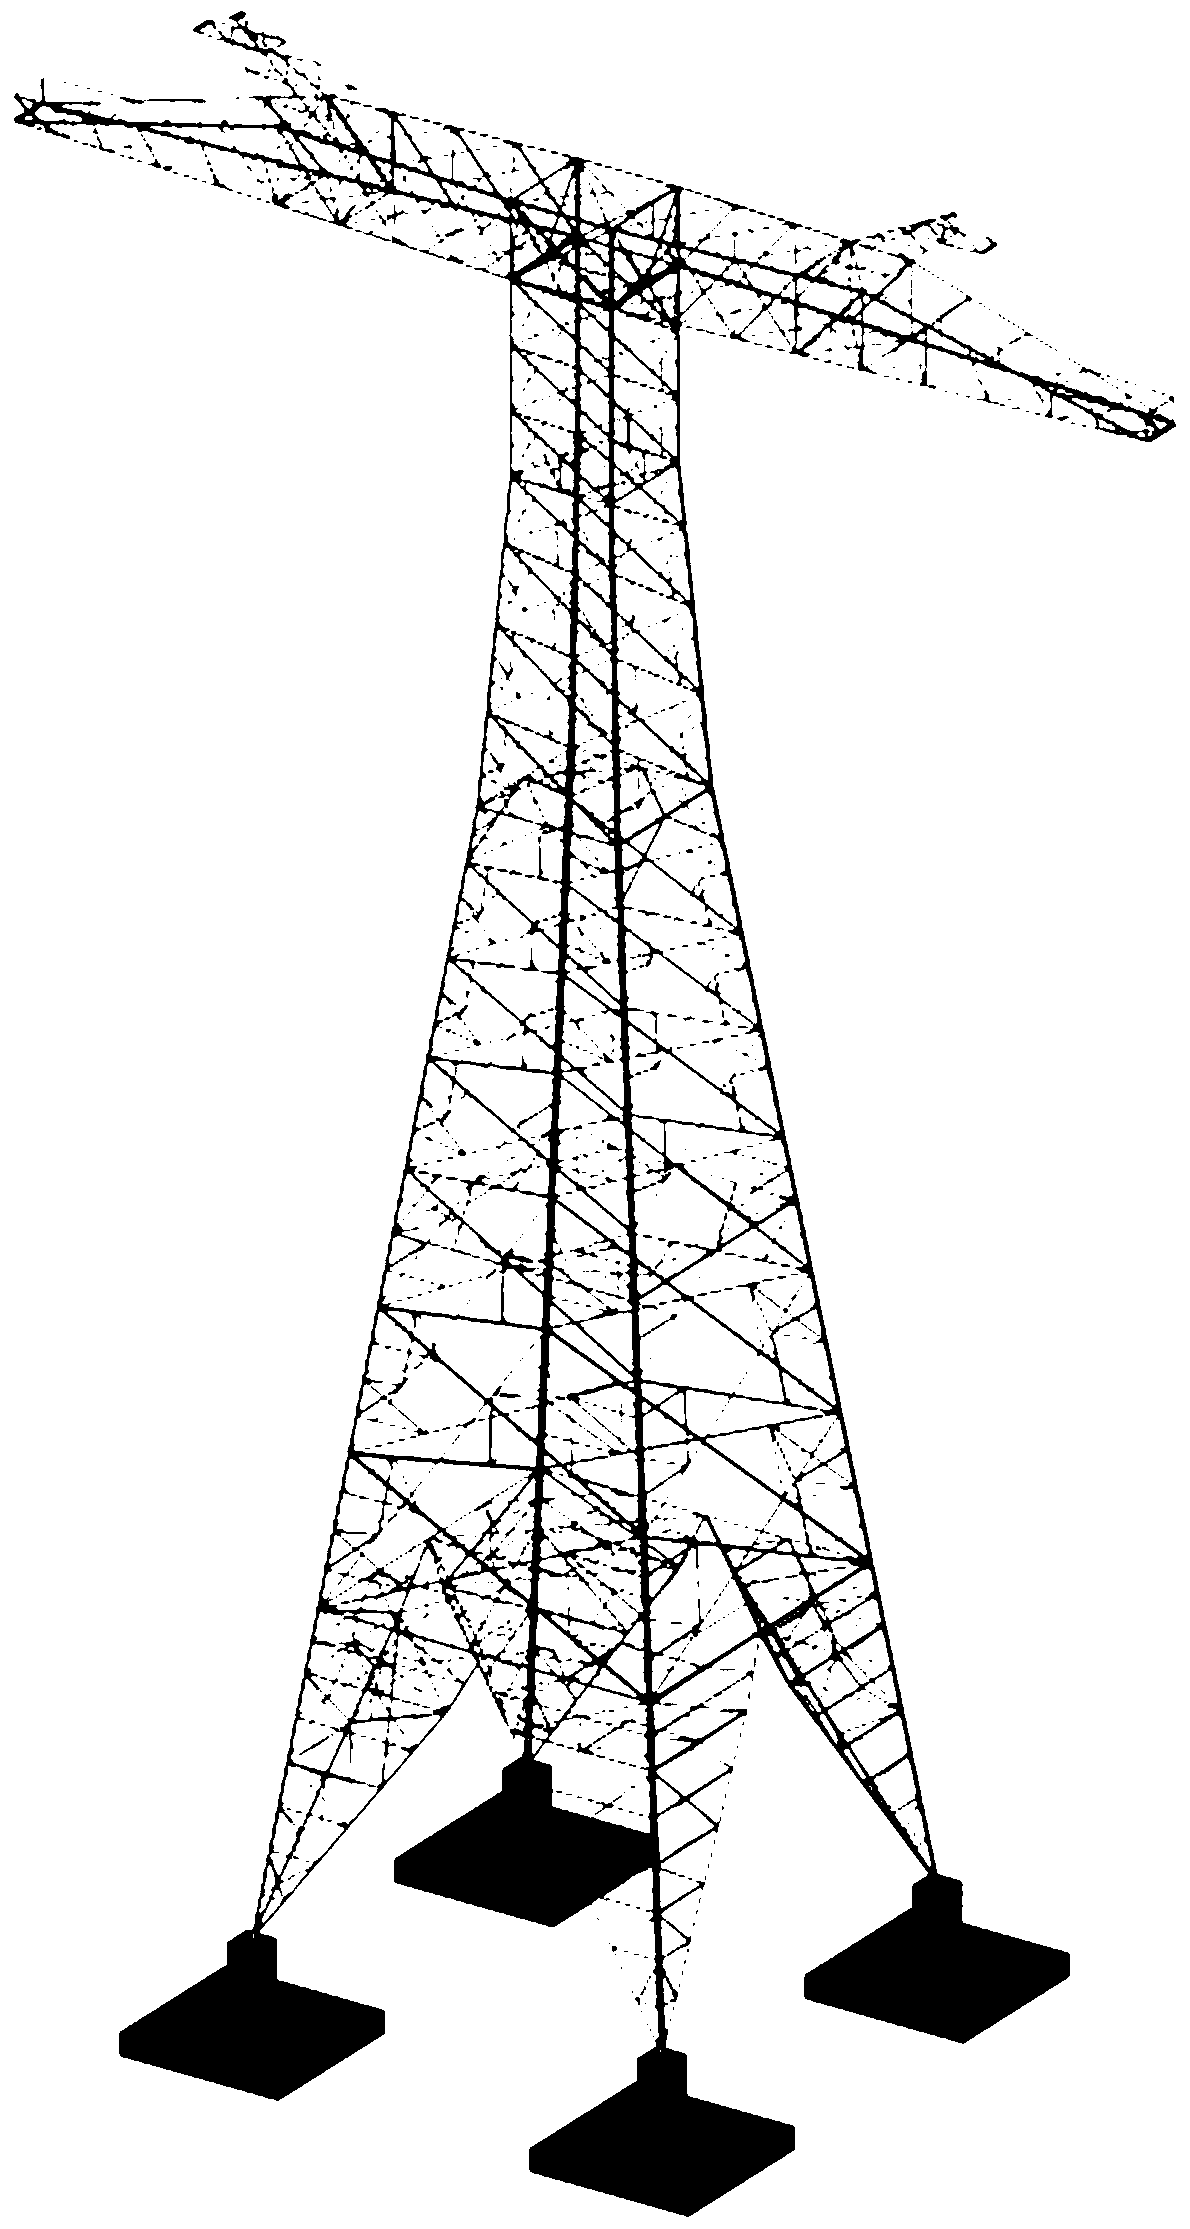 Test method for wind resistance of transmission towers